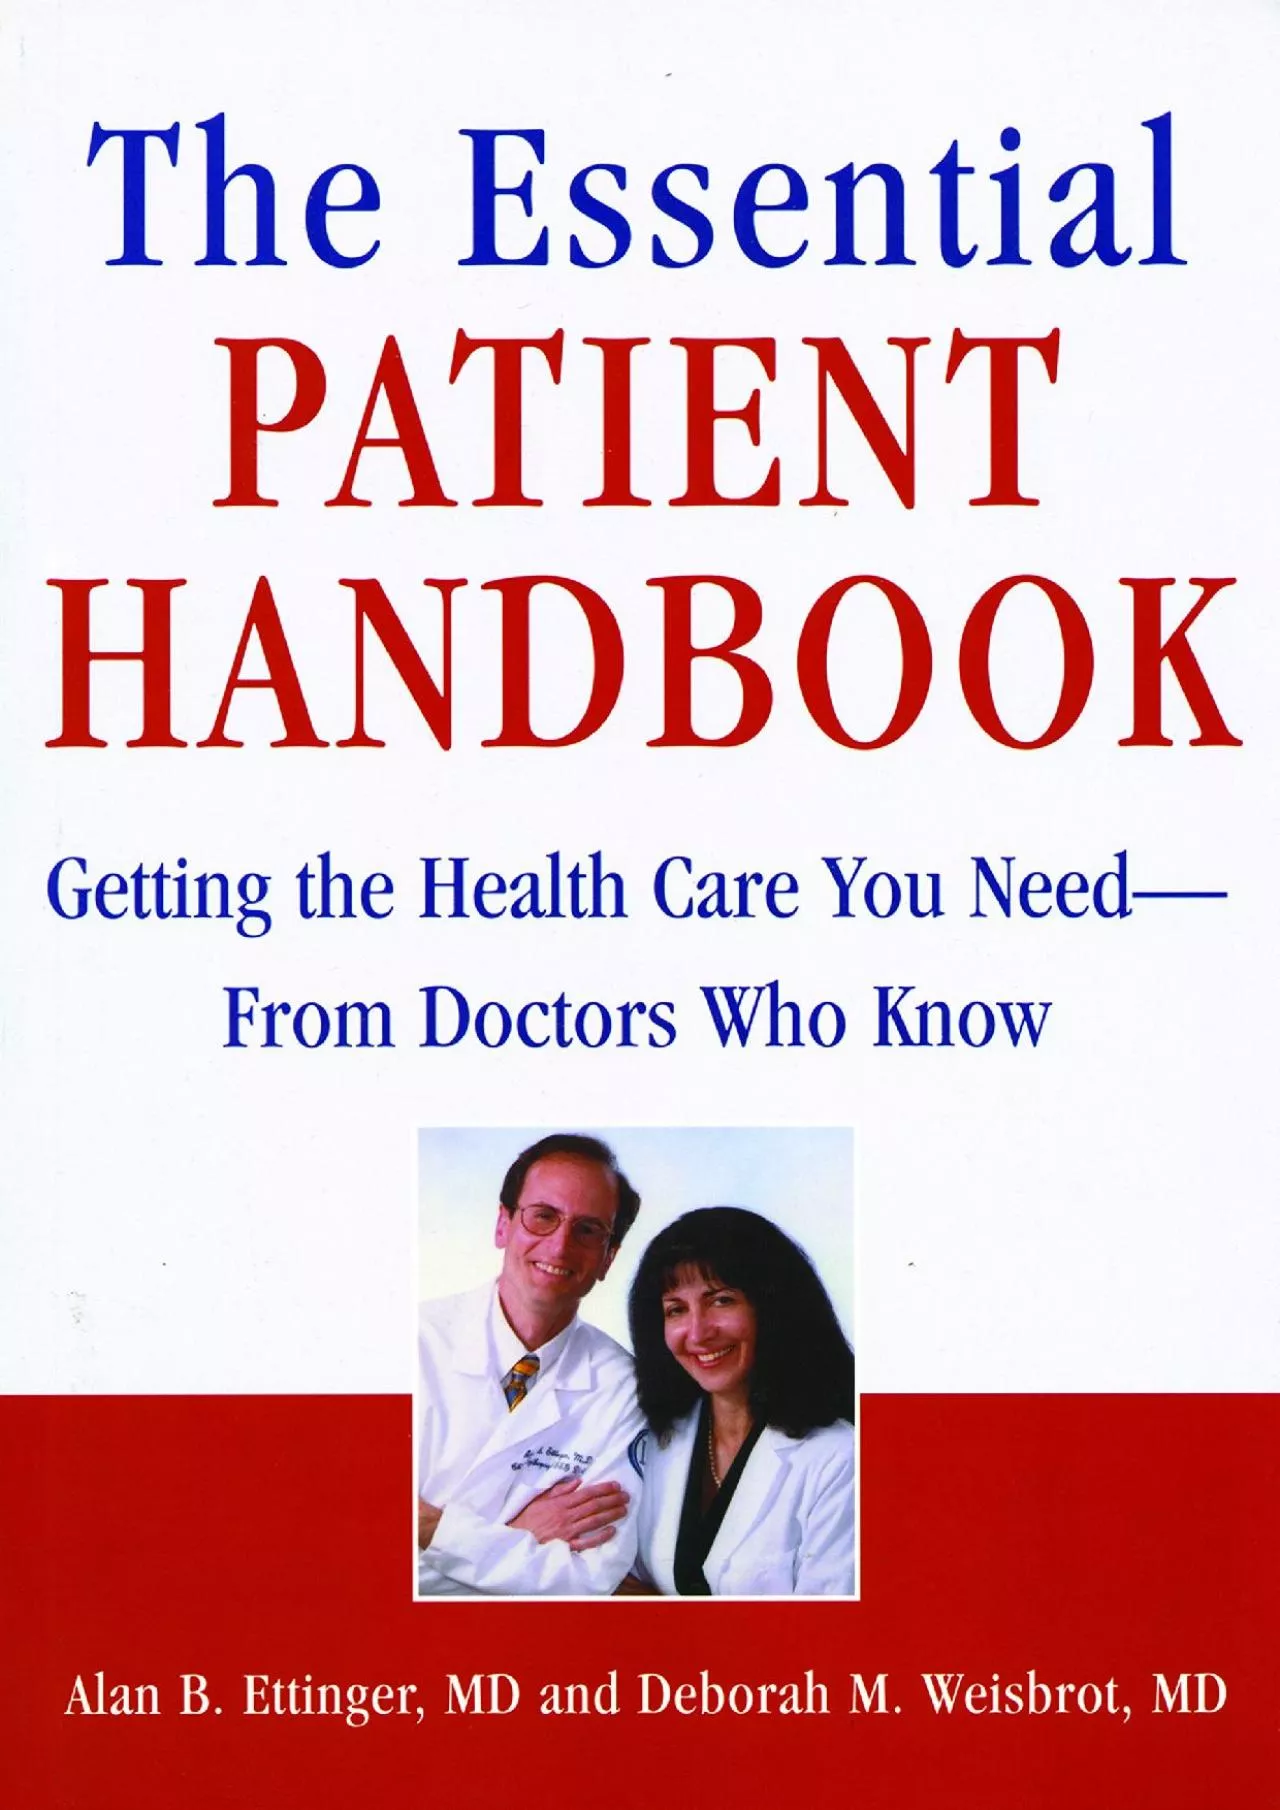 (EBOOK)-The Essential Patient Handbook: Getting the Health Care You Need - From Doctors